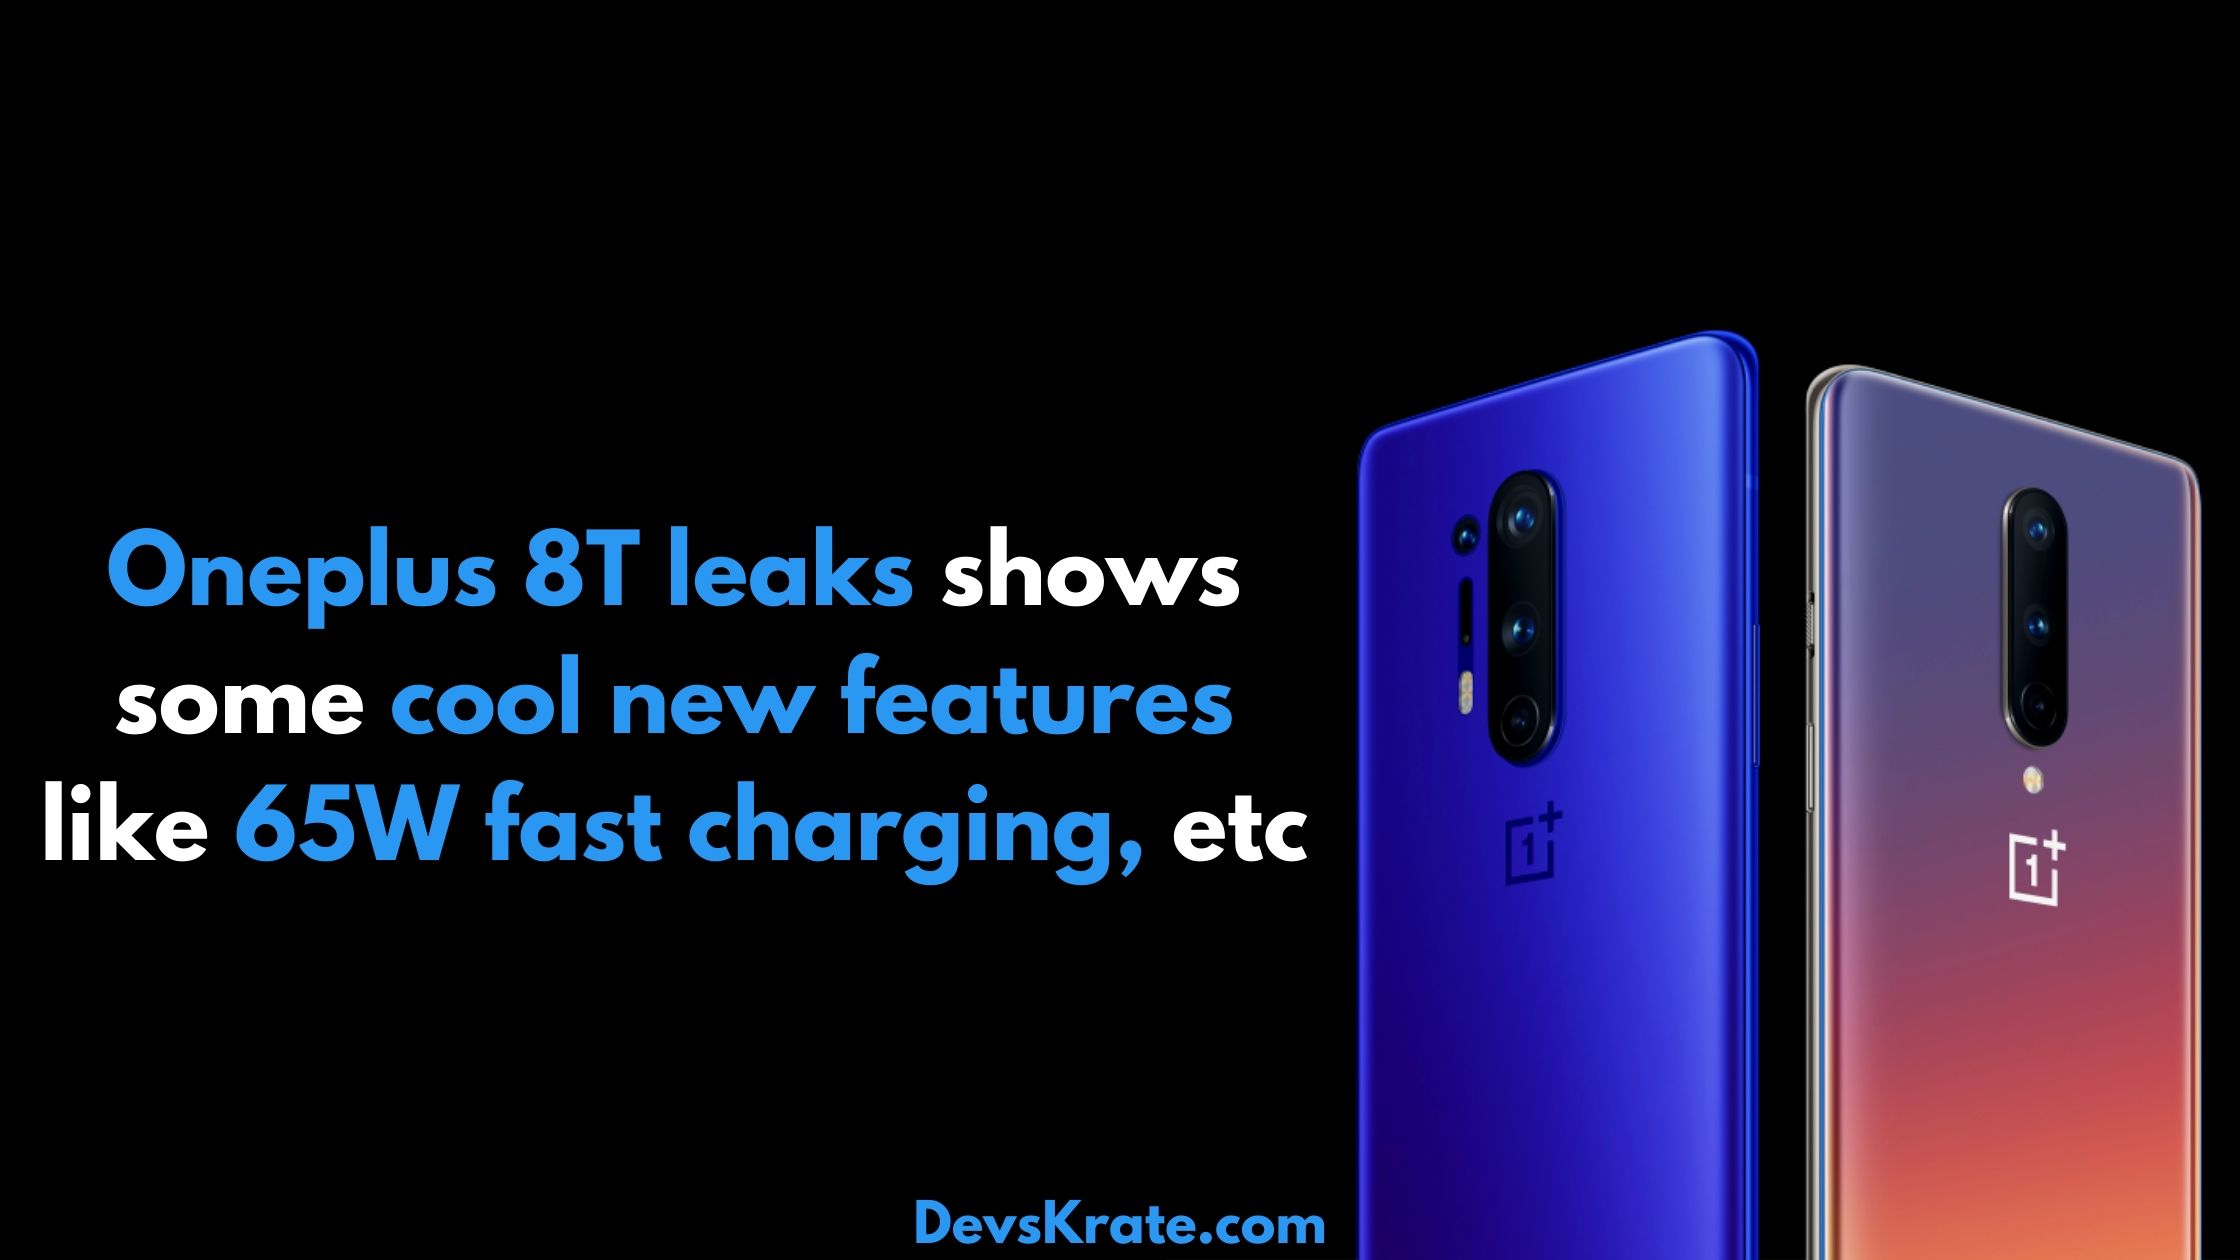 Leaks shows Faster charging for One Plus 8t and new color variant of One Plus 8